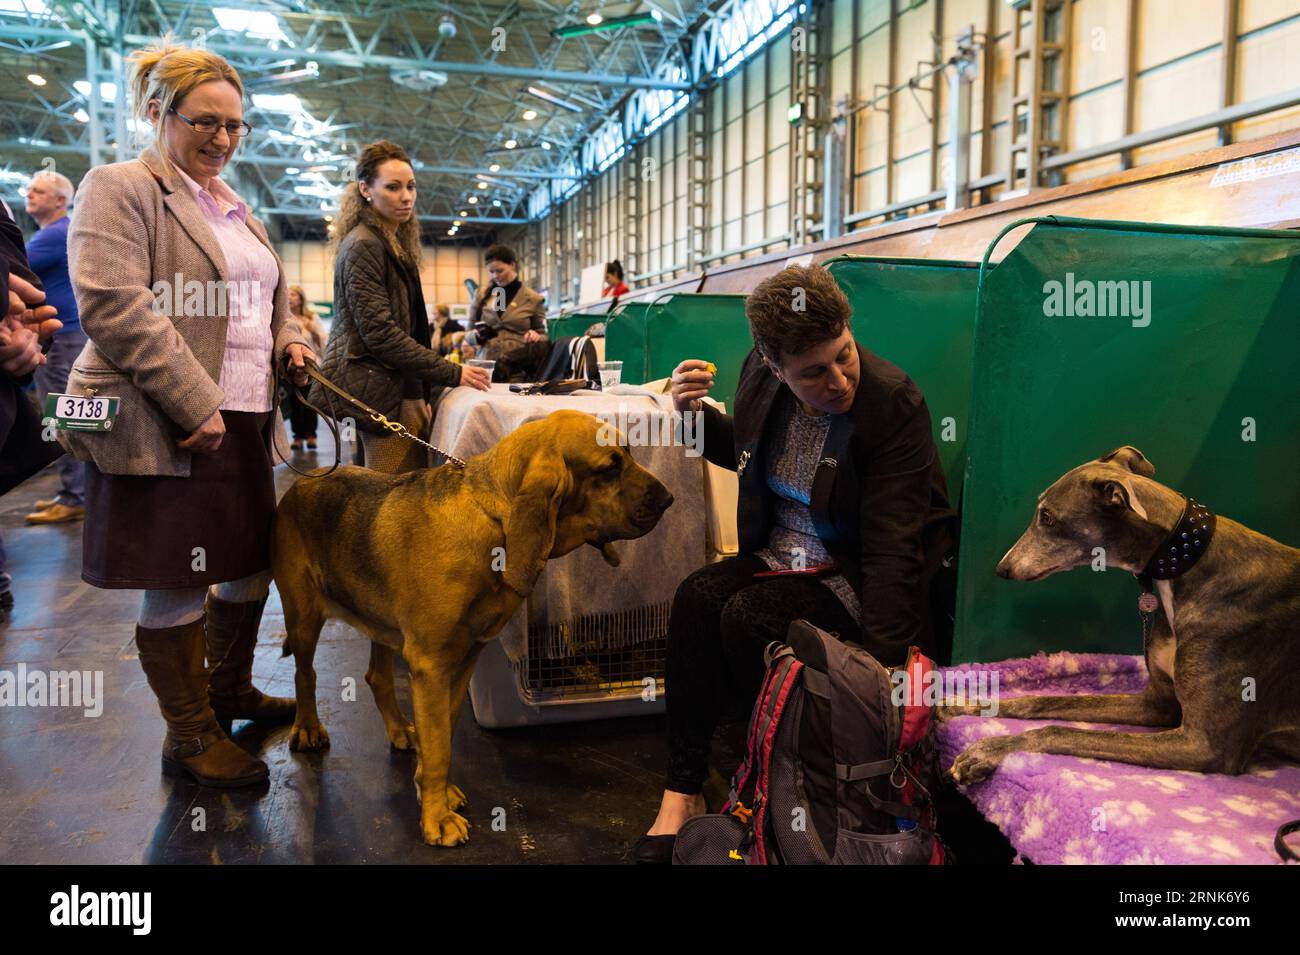 (170309) -- BIRMINGHAM (BRITAIN), March 9, 2017 -- Dogs and their owners relax in the interval of a competition during the annual Crufts dog show in Birmingham, Britain, on March 9, 2017. ) BRITAIN-BIRMINGHAM-CRUFTS DOG SHOW RayxTang PUBLICATIONxNOTxINxCHN   Birmingham Britain March 9 2017 Dogs and their Owners Relax in The interval of a Competition during The Annual Crufts Dog Show in Birmingham Britain ON March 9 2017 Britain Birmingham Crufts Dog Show RayxTang PUBLICATIONxNOTxINxCHN Stock Photo